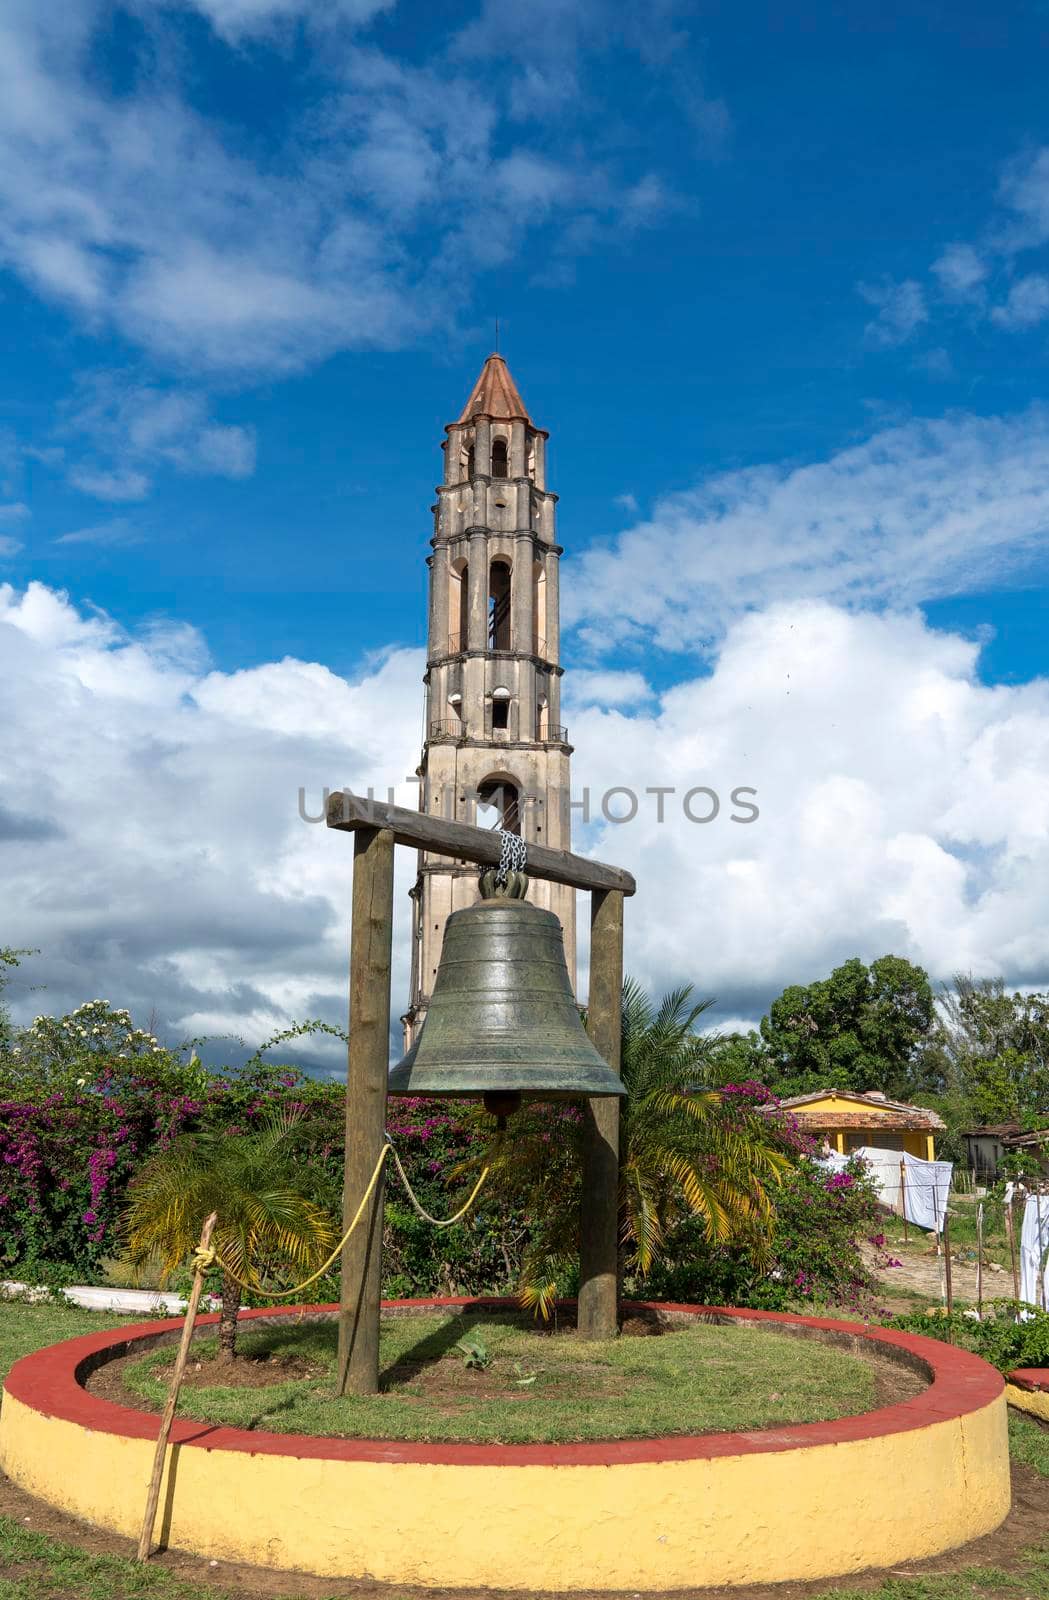 Manaca Iznaga Tower and bell in Valley of the Sugar Mills by Arsgera